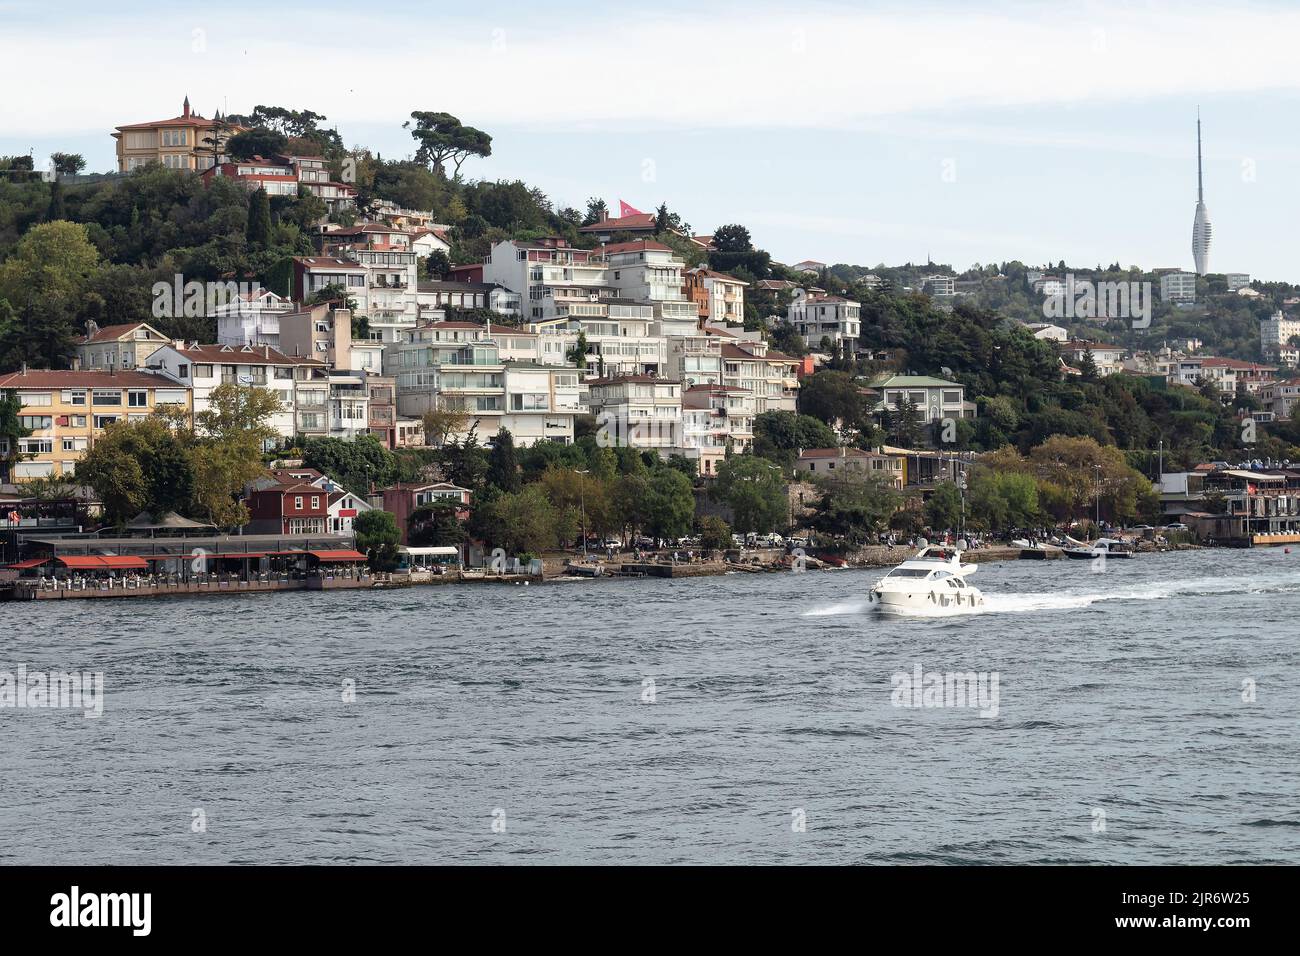 View of a yacht on Bosphorus and Cengelkoy area of Asian side in Istanbul. Stock Photo